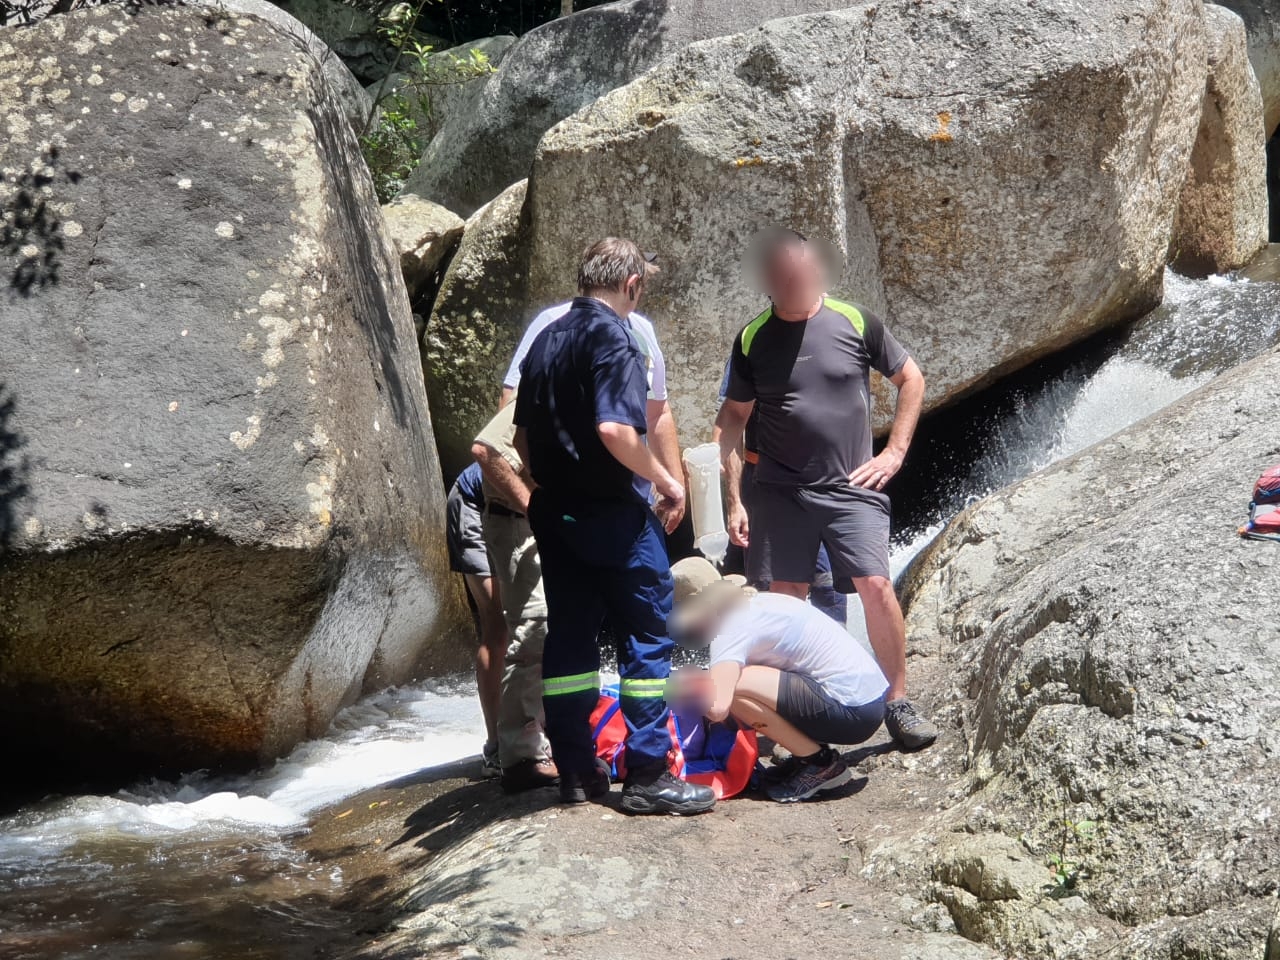 Woman seriously injured after falling in Kloof Gorge